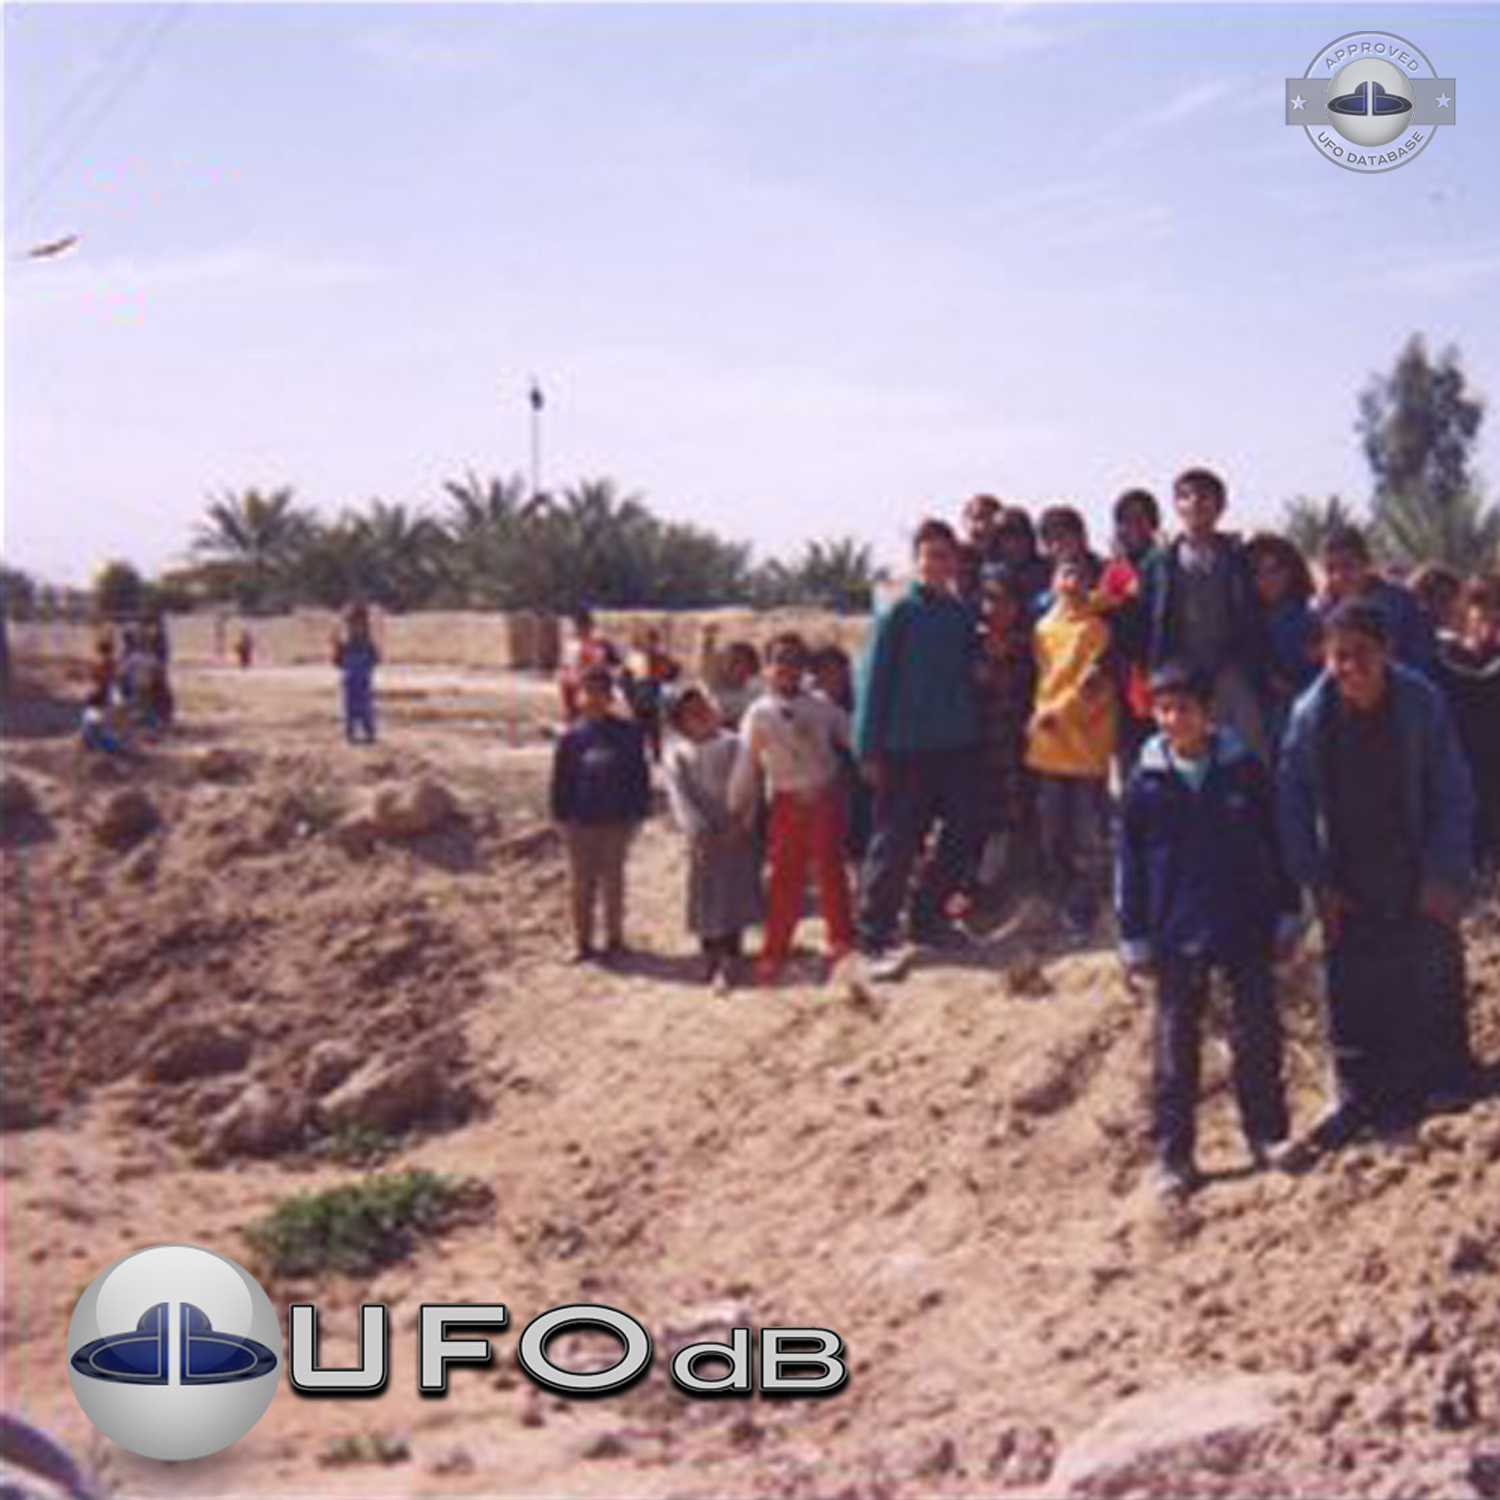 UFO seen passing over Kids in Baghdad, Iraq | April 03 2004 UFO Picture #199-2